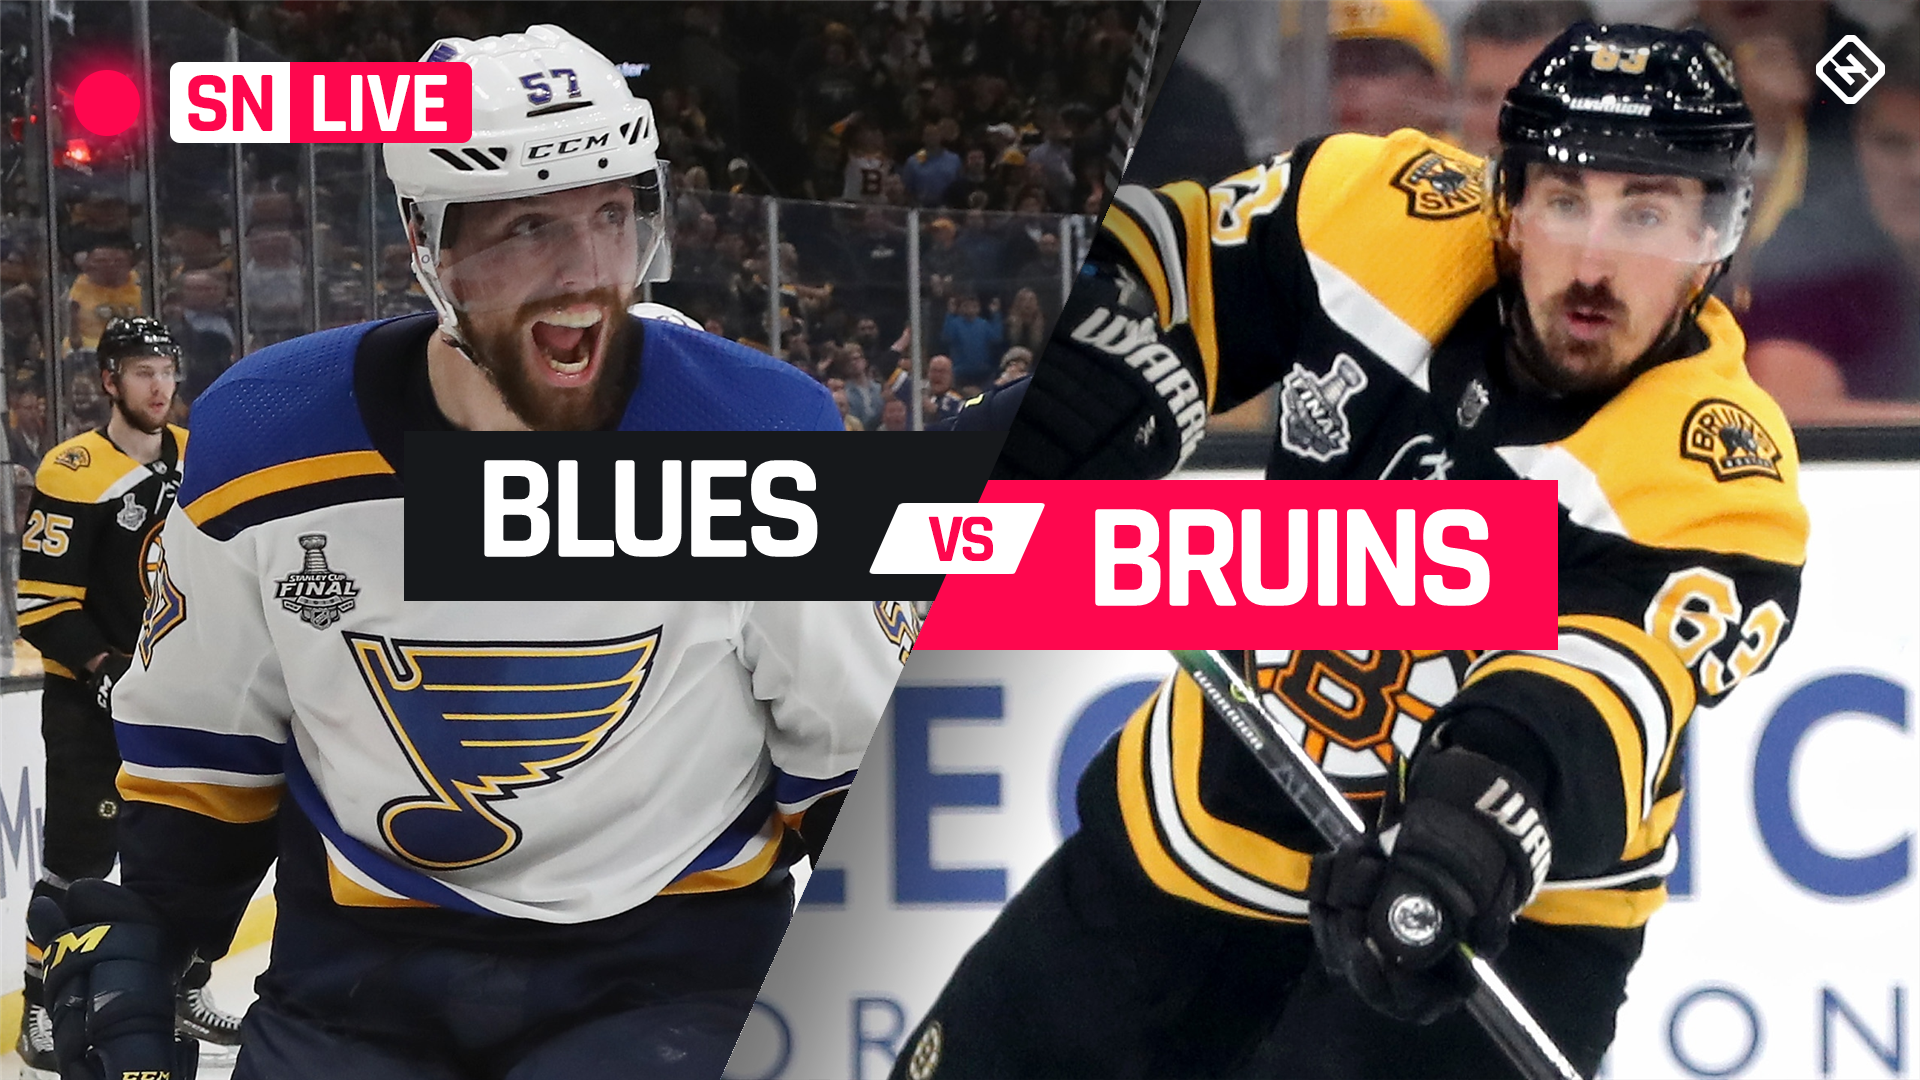 Blues vs. Bruins Live score, Game 7 updates, highlights from 2019